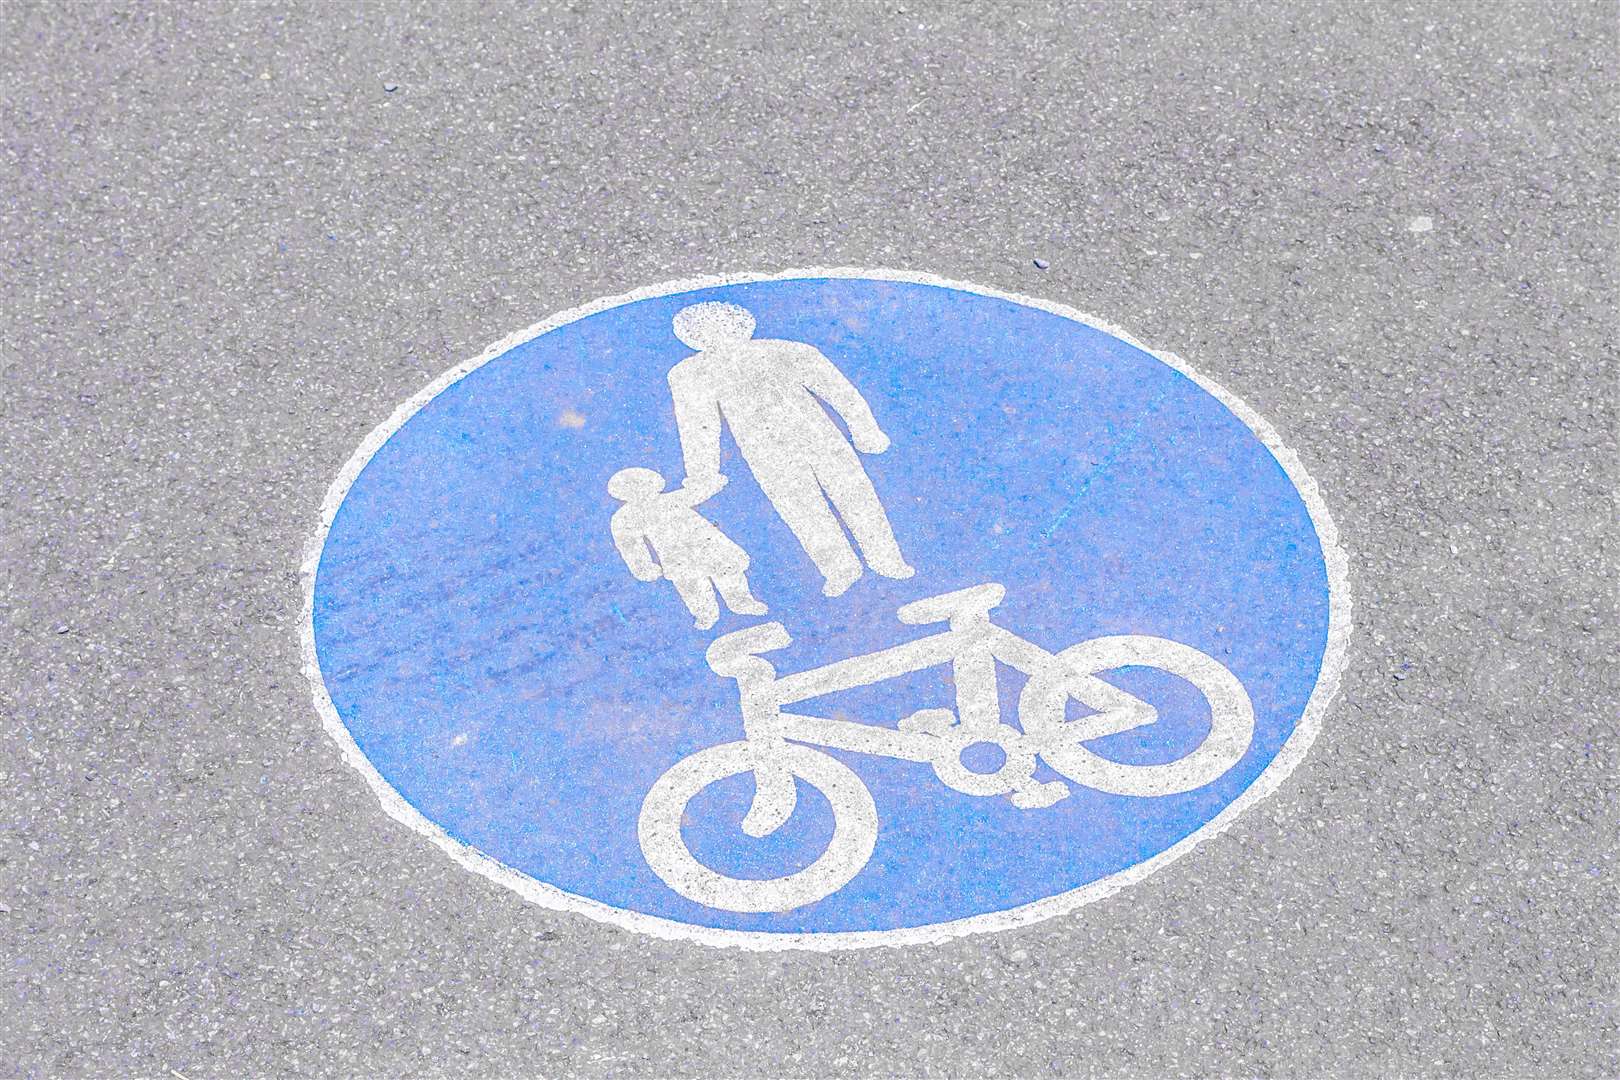 Views are being sought over plans to improve pedestrian and cyclist safety in several Inverness neighbourhoods.